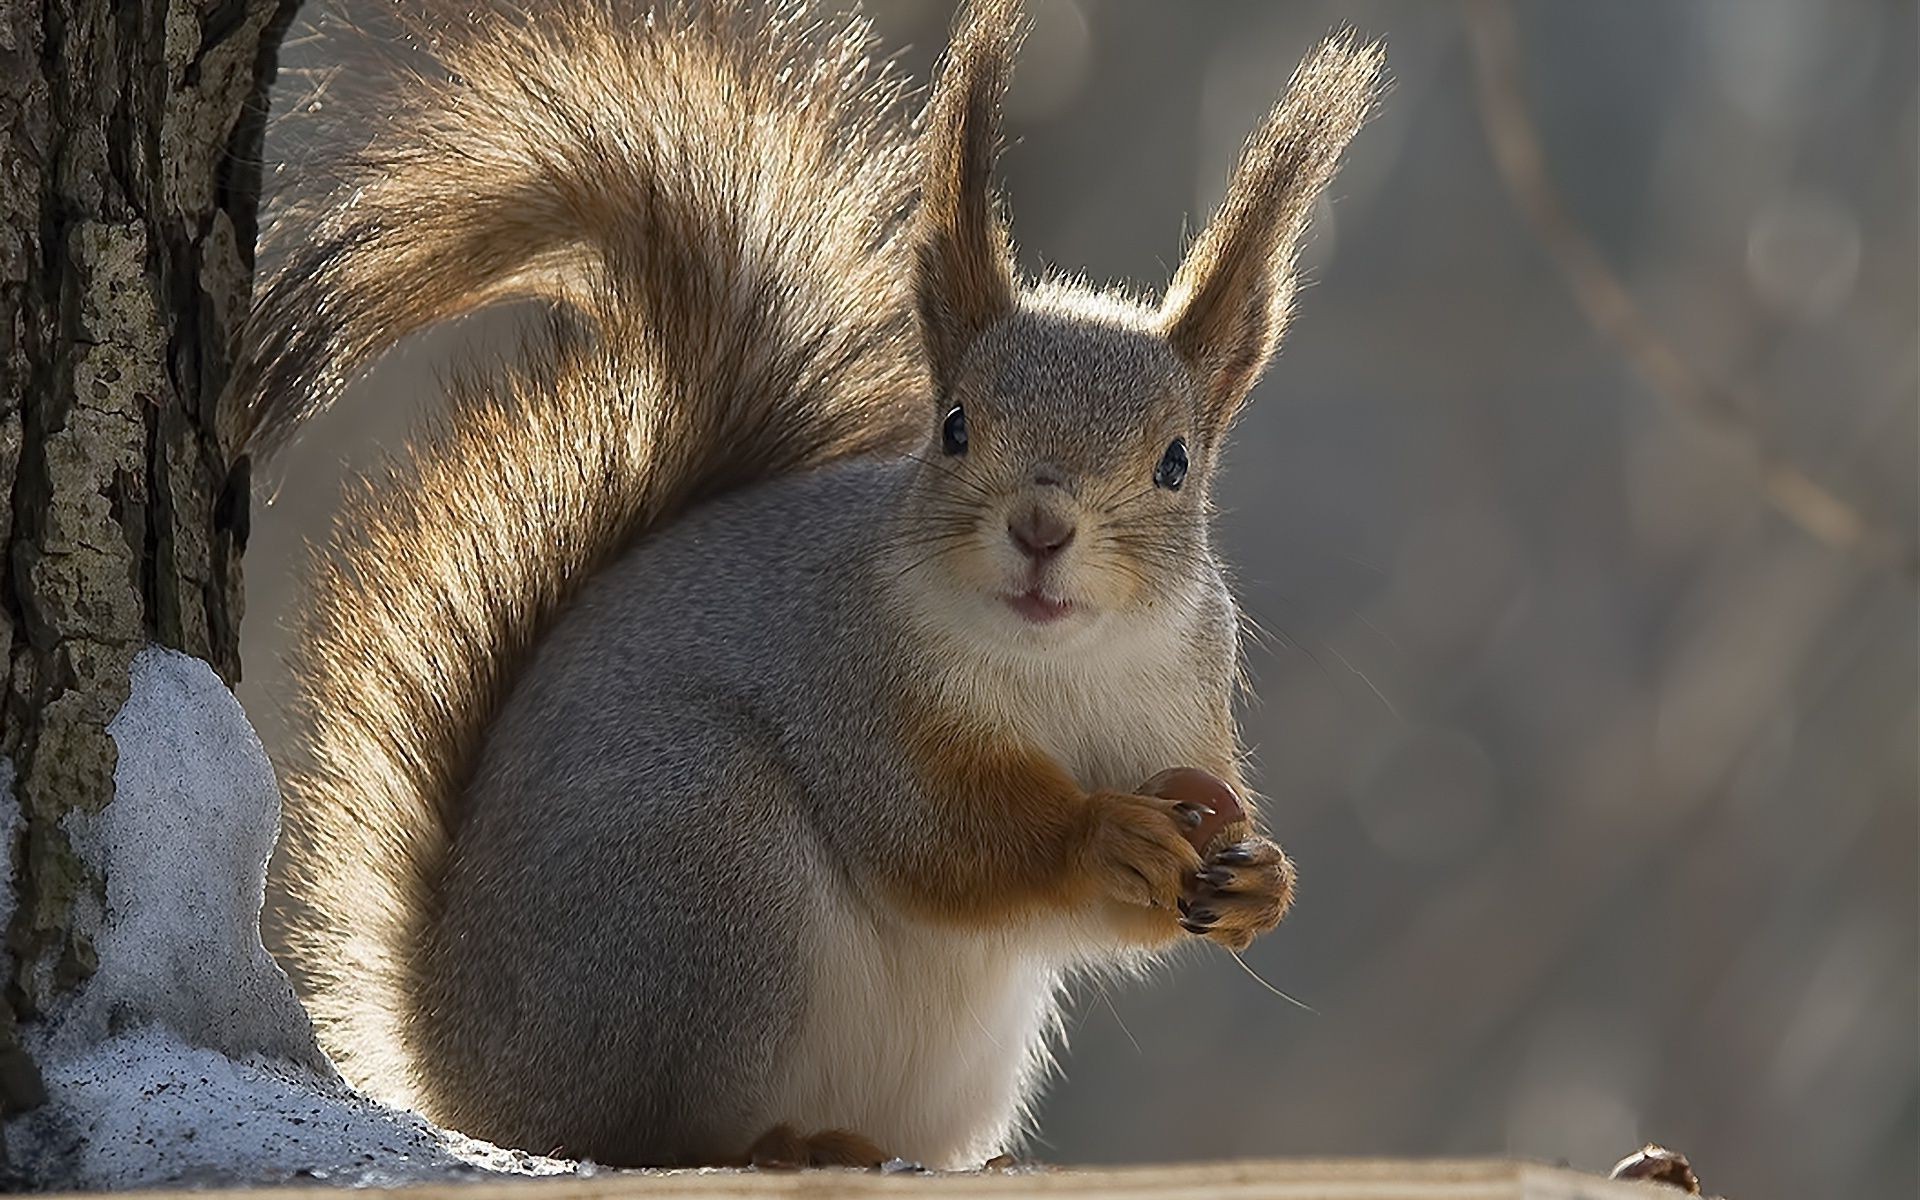 proteins mammal wildlife nature cute outdoors animal rodent fur squirrel